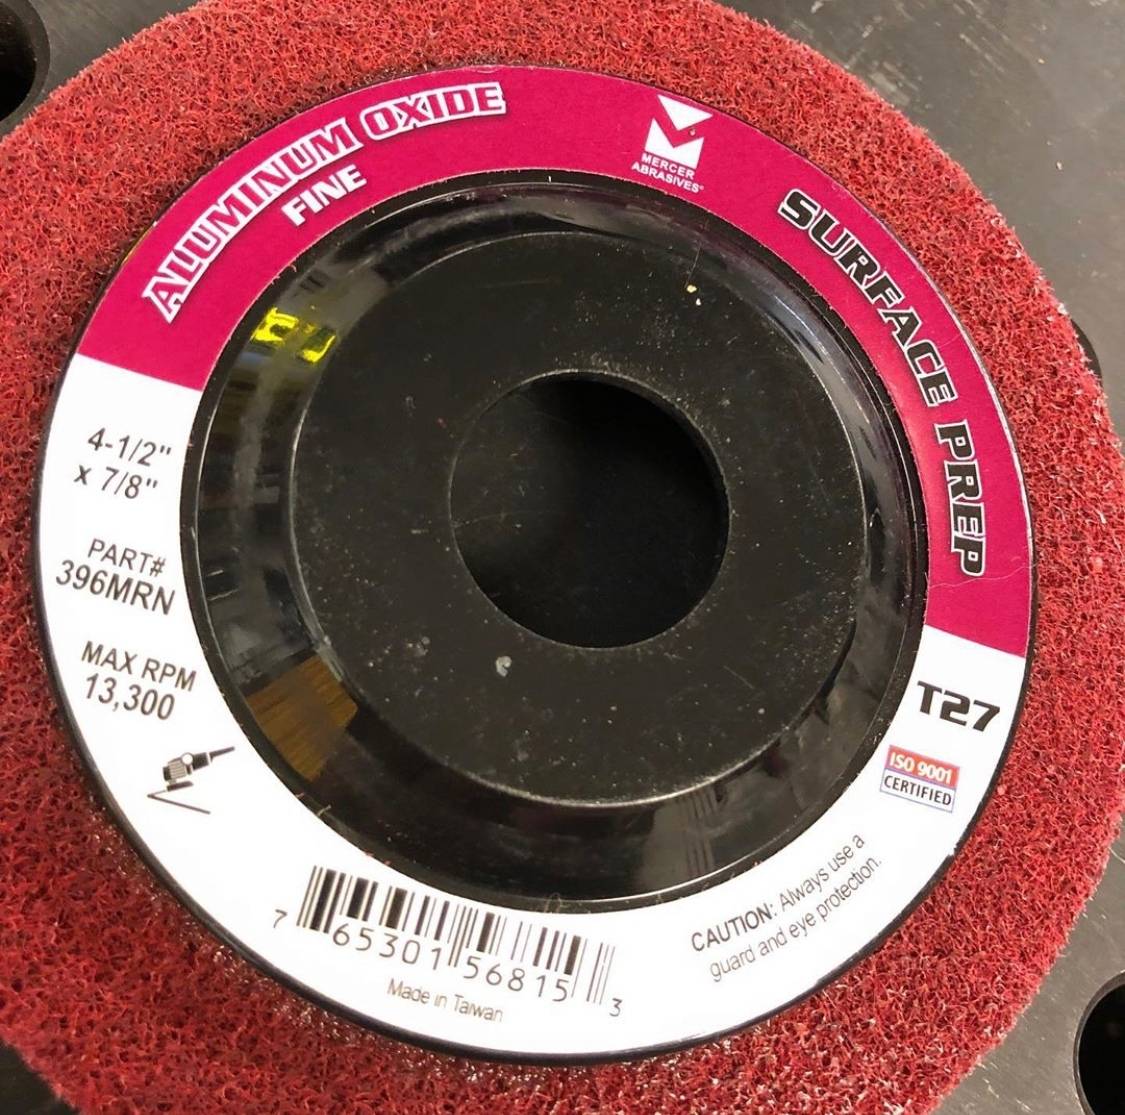 Phil recommends the red 4.5” surface prep discs for his angle grinder